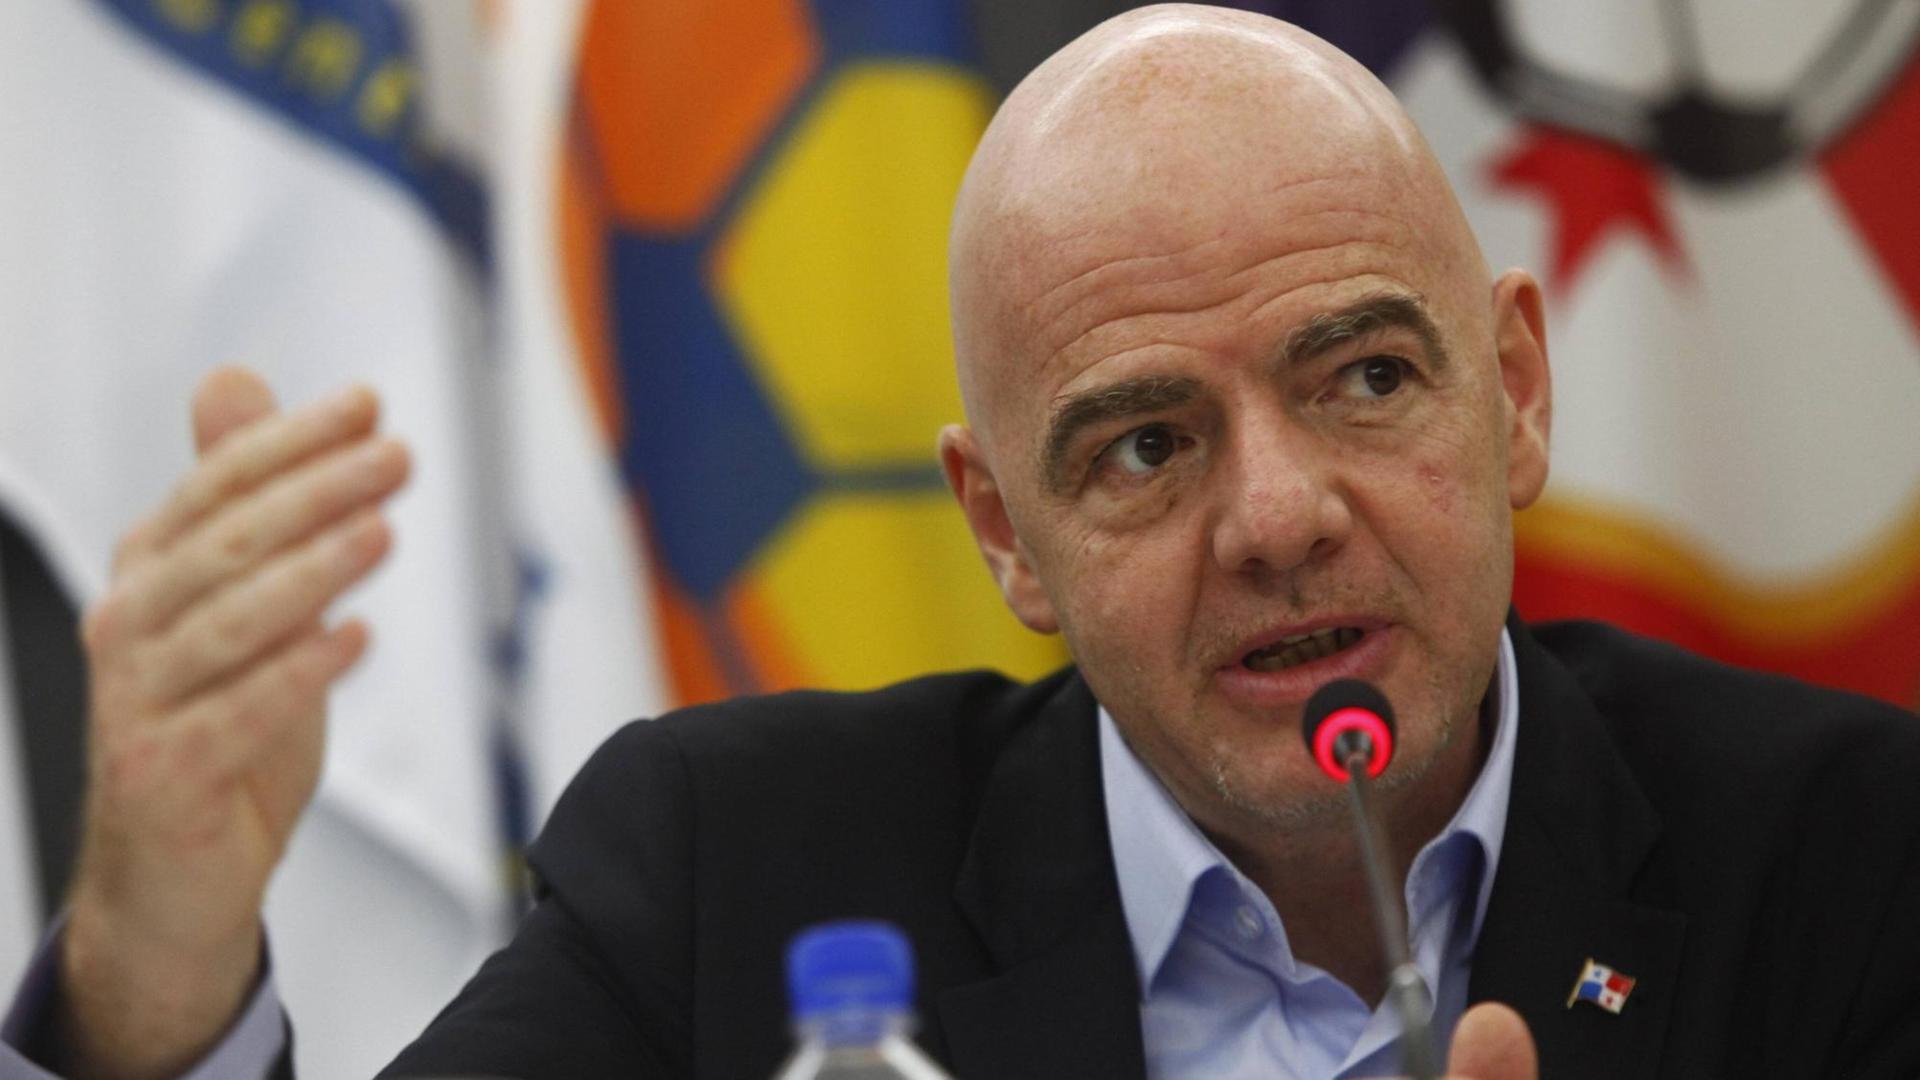 President of FIFA, Gianni Infantino, speaks during a press conference PK Pressekonferenz in Panama City, Panama, 14 March 2018. Infantino made it clear that the Video Arbitration System (VAR) is here to stay and that the 2018 Russian World Cup will be historic and exceptional . Infantino supports the use of VAR and ensures that Russia 2018 will be historic and exceptional !ACHTUNG: NUR REDAKTIONELLE NUTZUNG! PUBLICATIONxINxGERxSUIxAUTxONLY Copyright: xBienvenidoxVelascox CPN91 20180317-636569112227978828